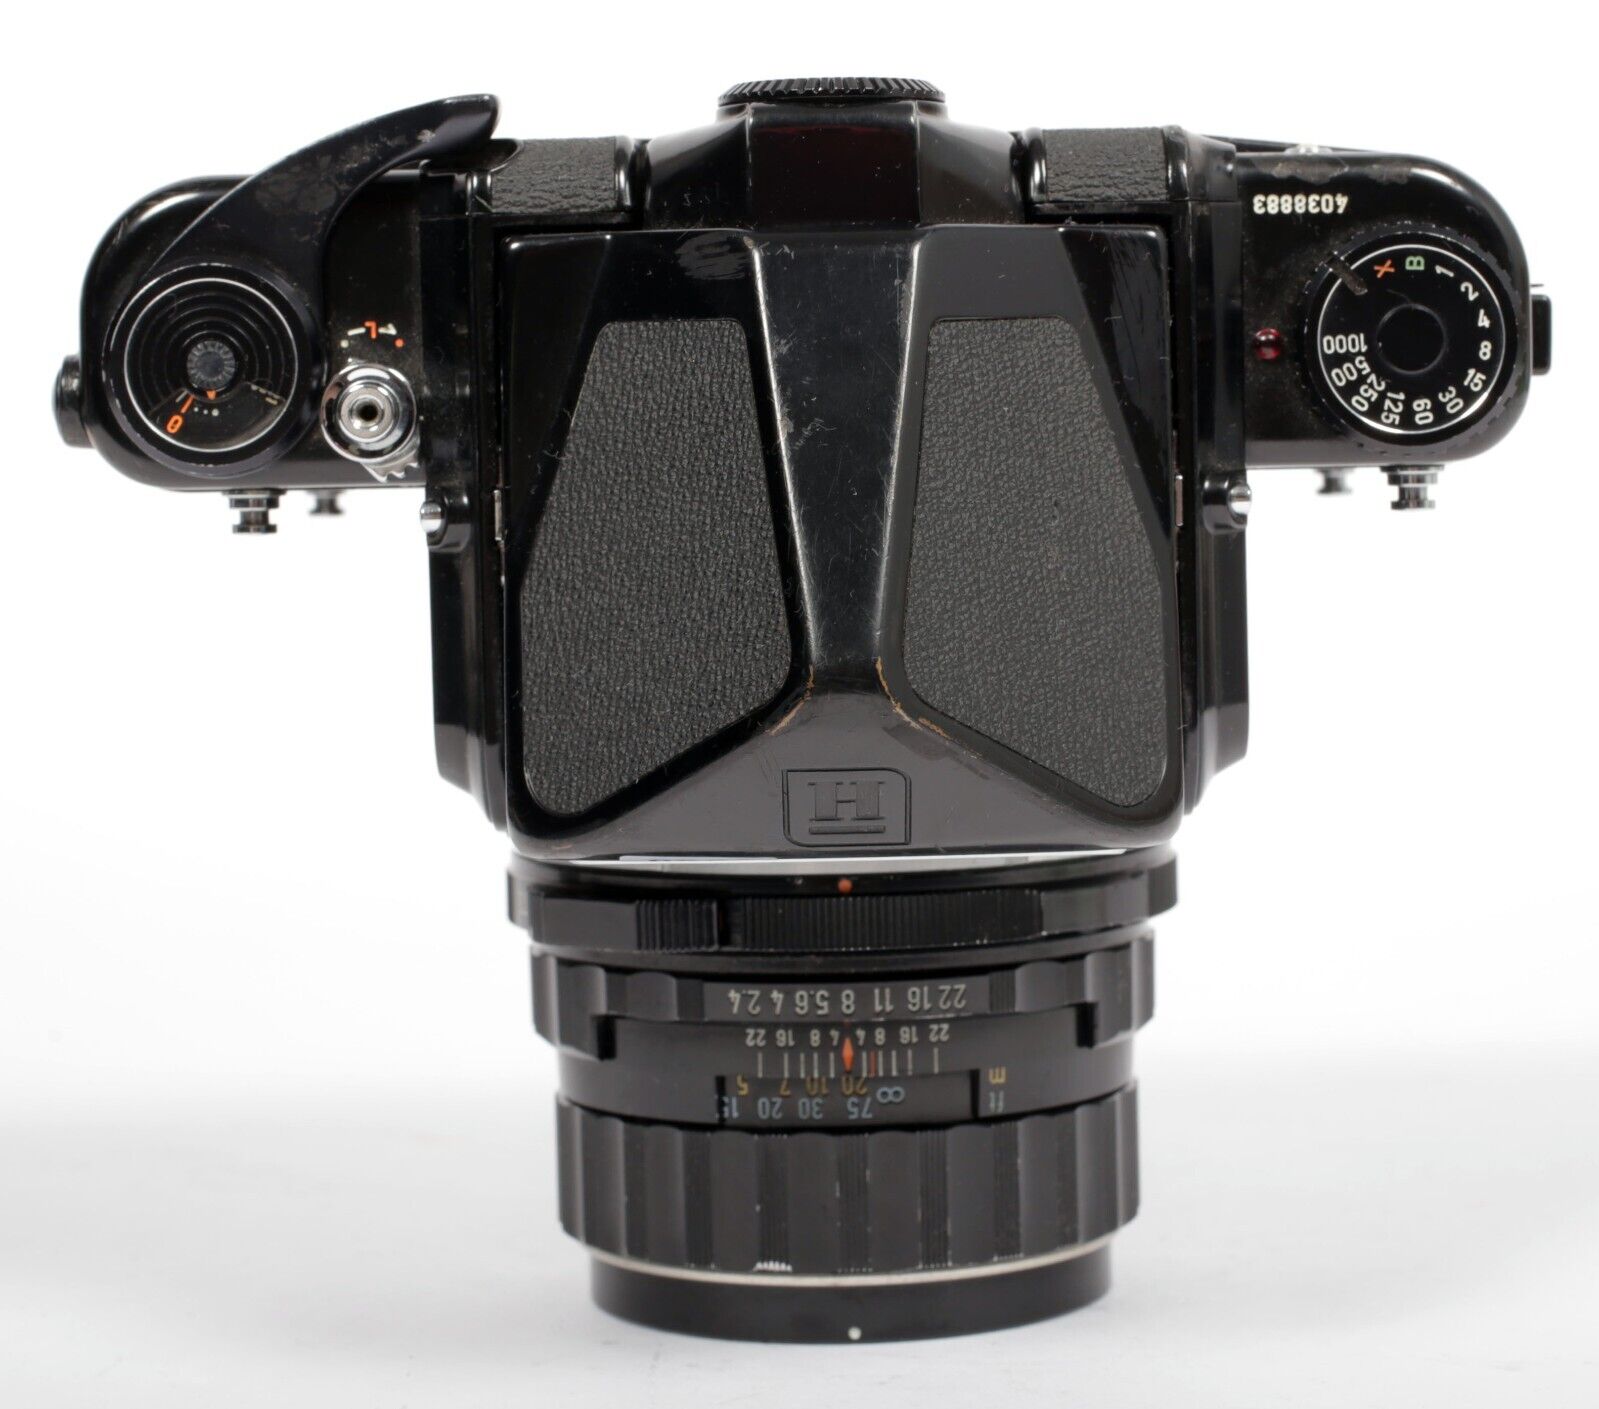 Pentax 6X7 camera with SMC 105mm F2.4 lens #8900 | CatLABS